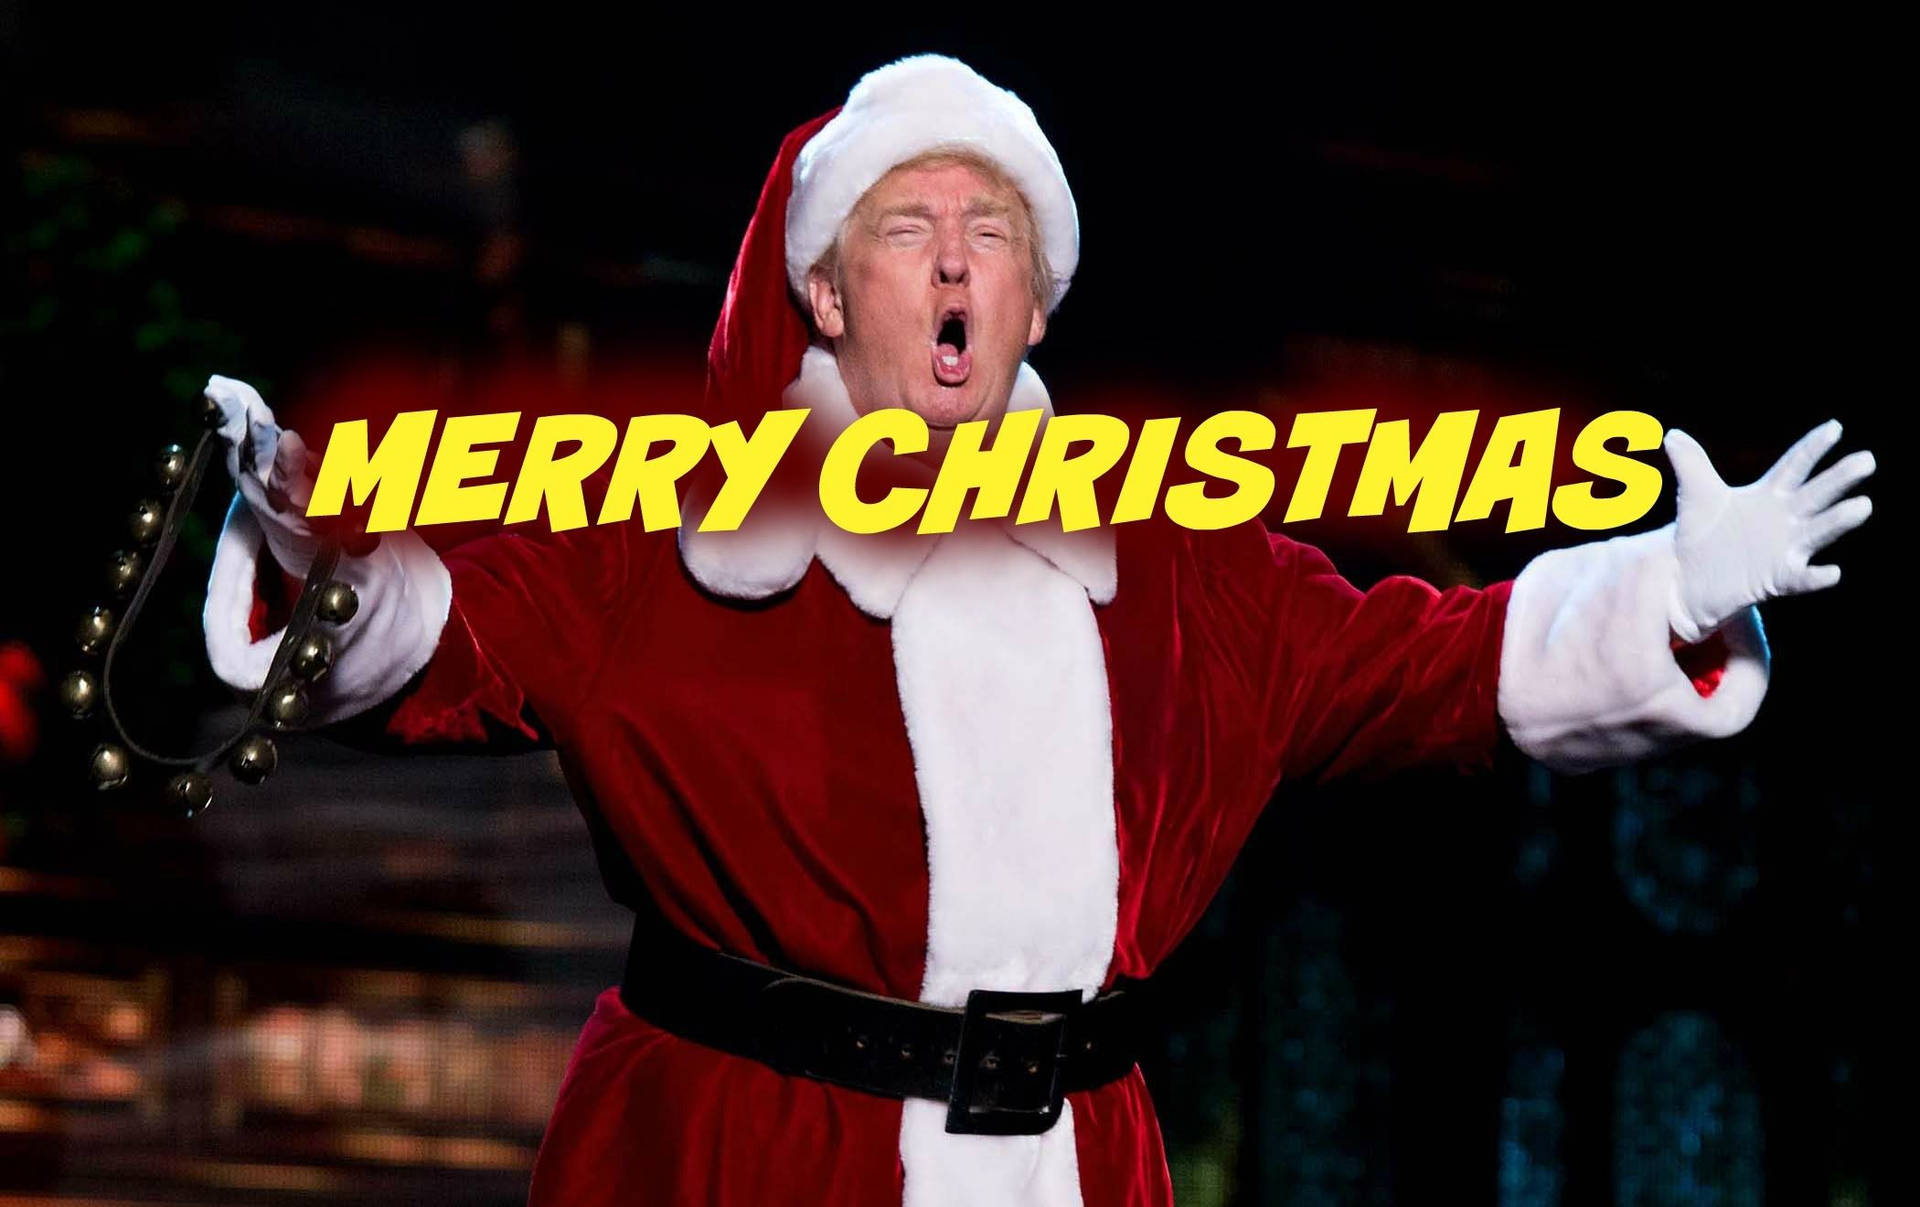 Spread The Joy Of Christmas With President Trump This Holiday Season! Background